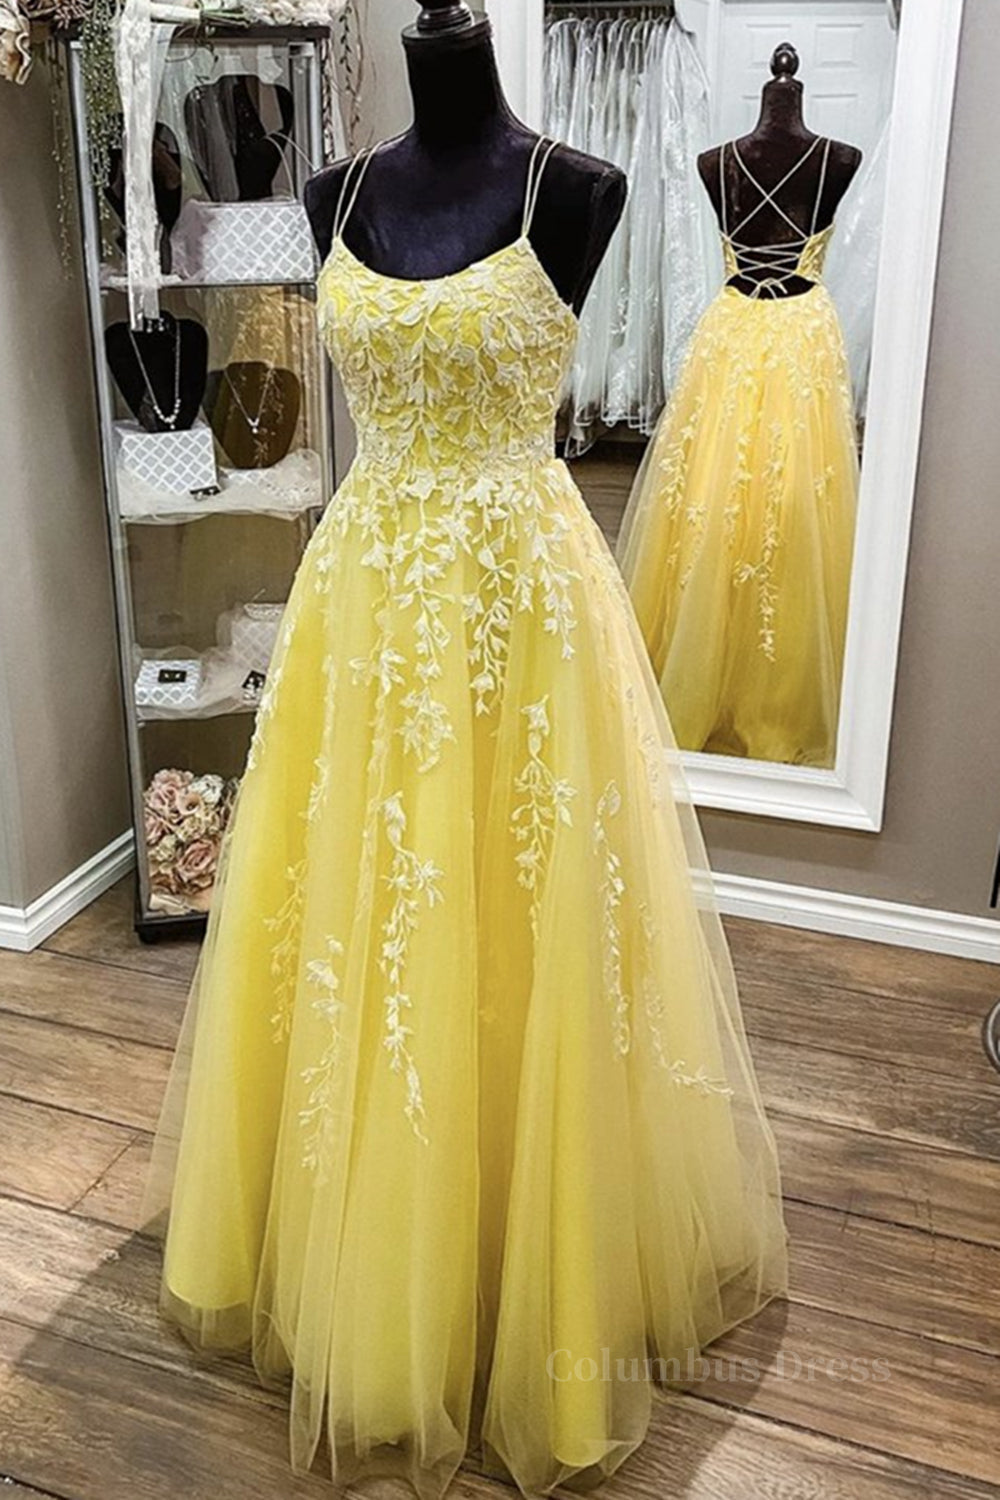 Formal Dresses For Weddings Near Me, Backless Yellow Lace Long Prom Dress, Long Yellow Lace Formal Dress, Yellow Evening Dress